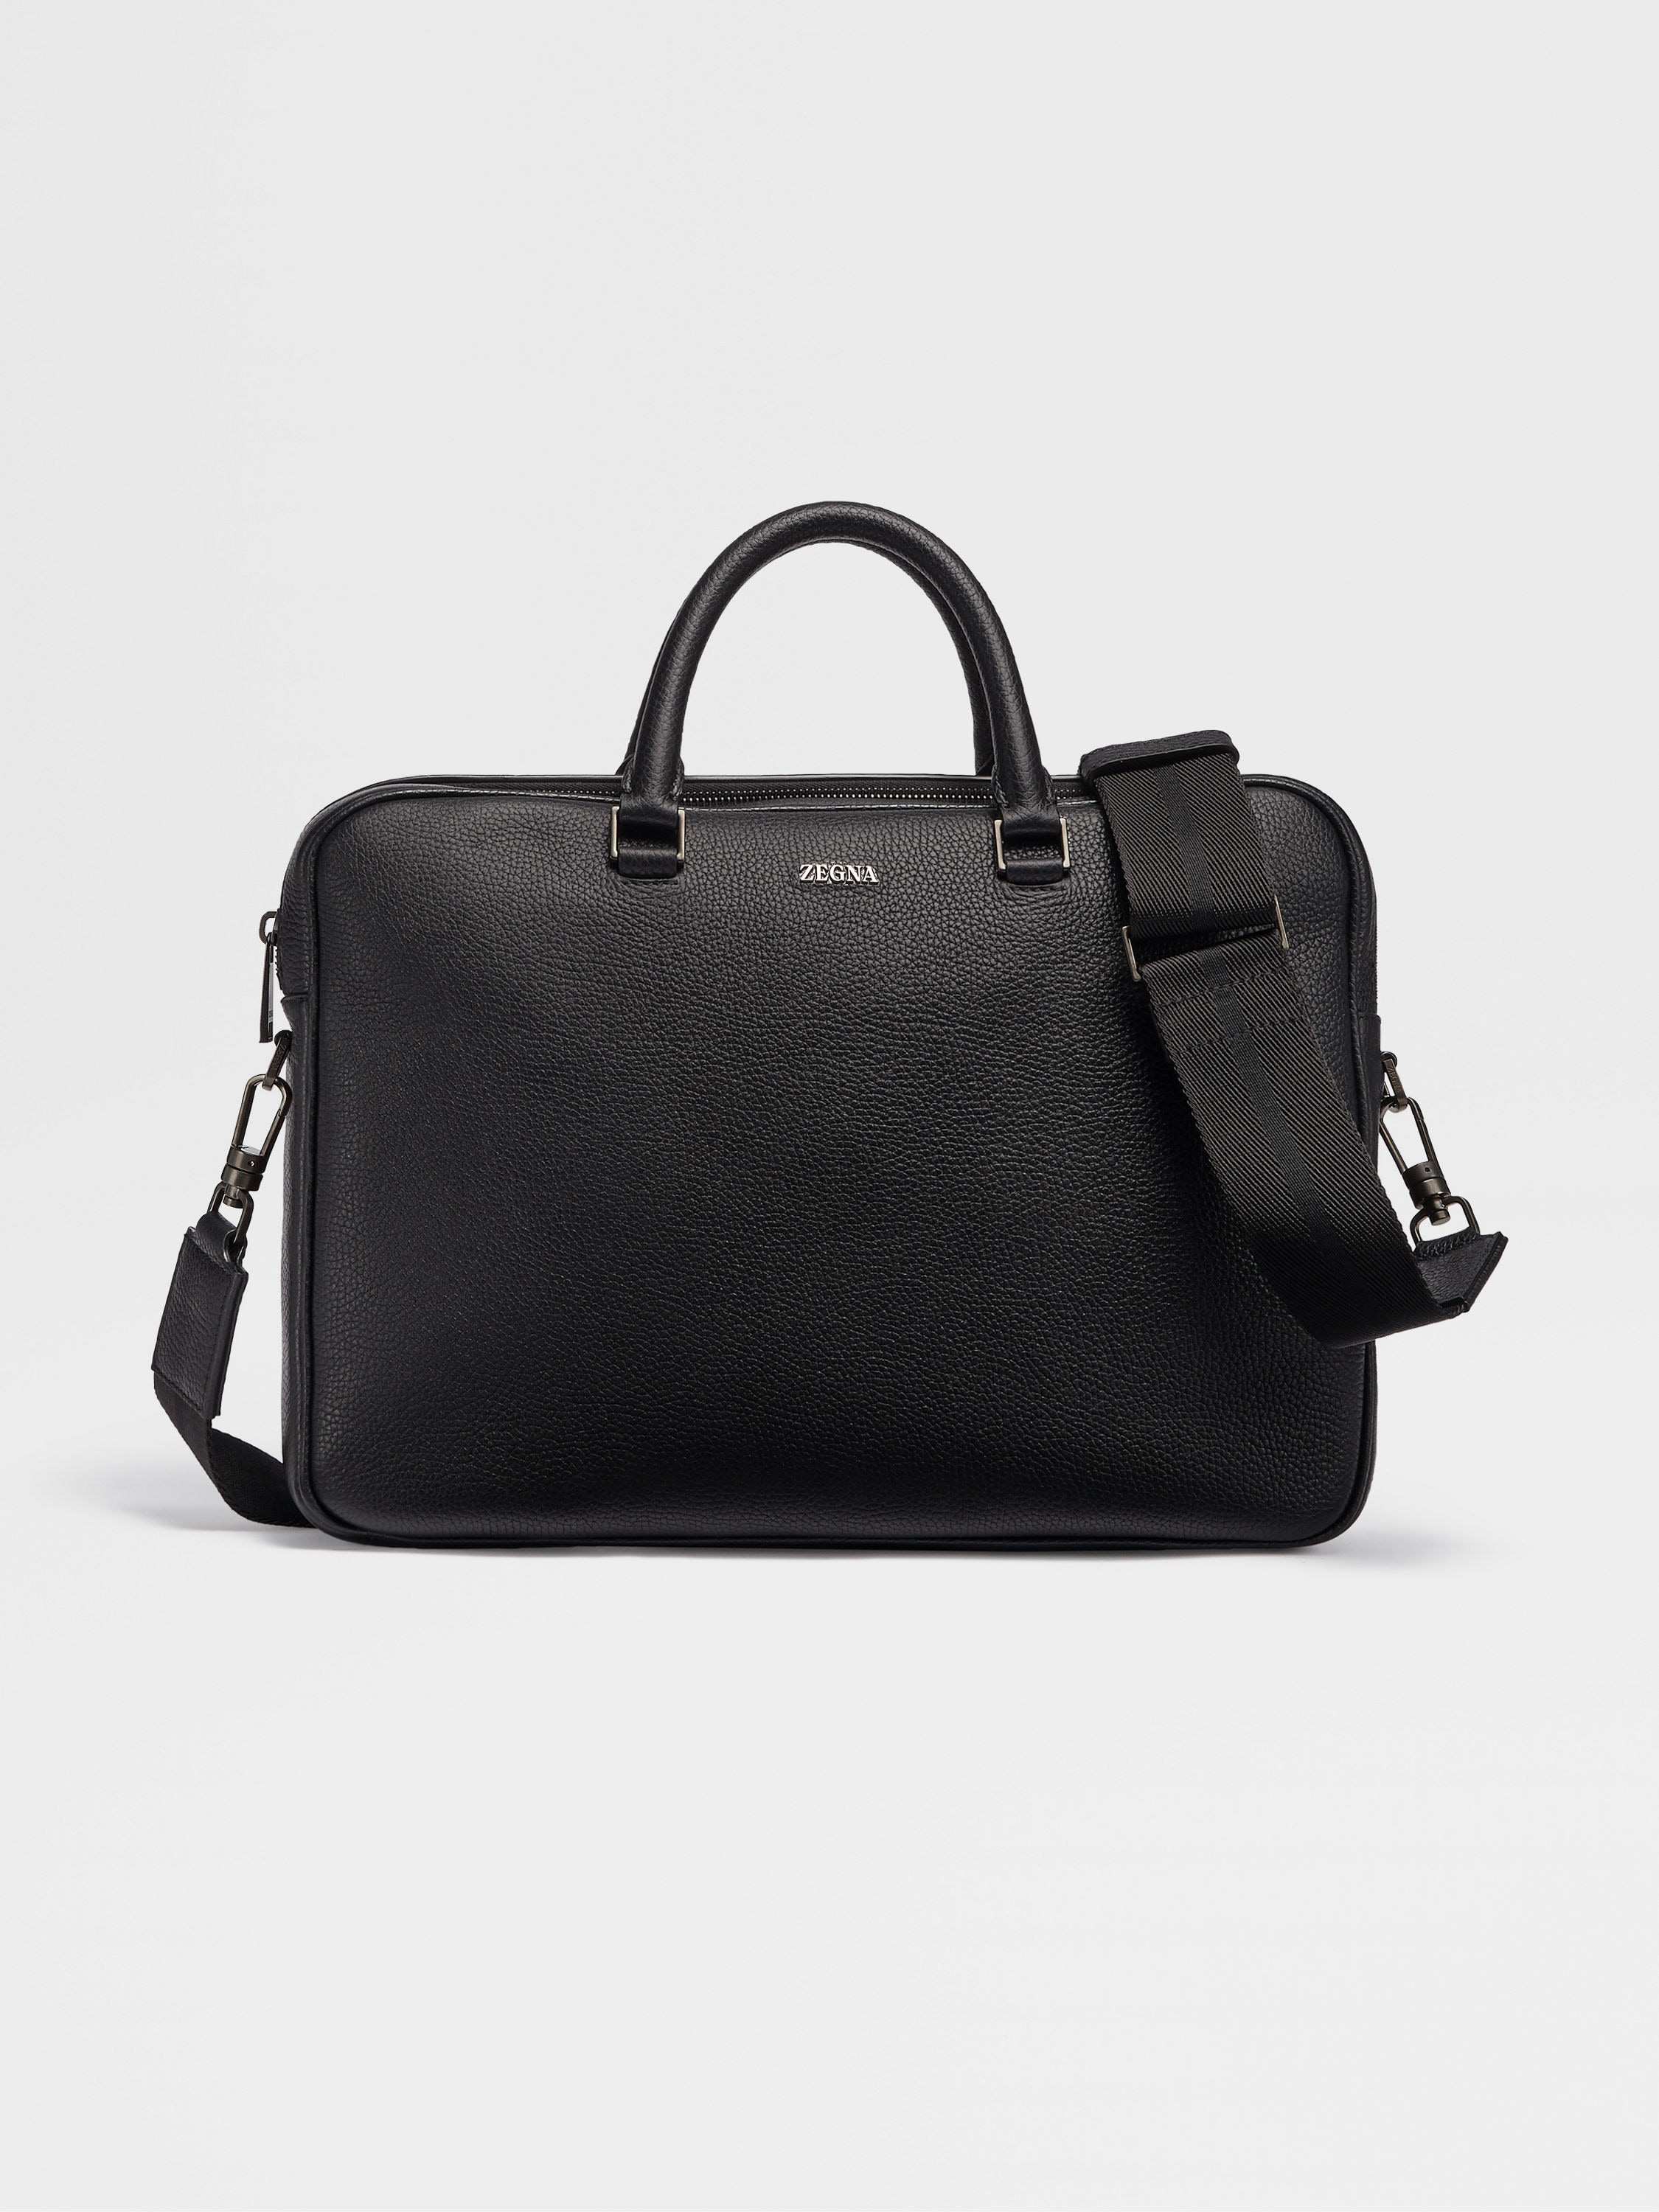 Black Grained Leather Edgy Business Bag